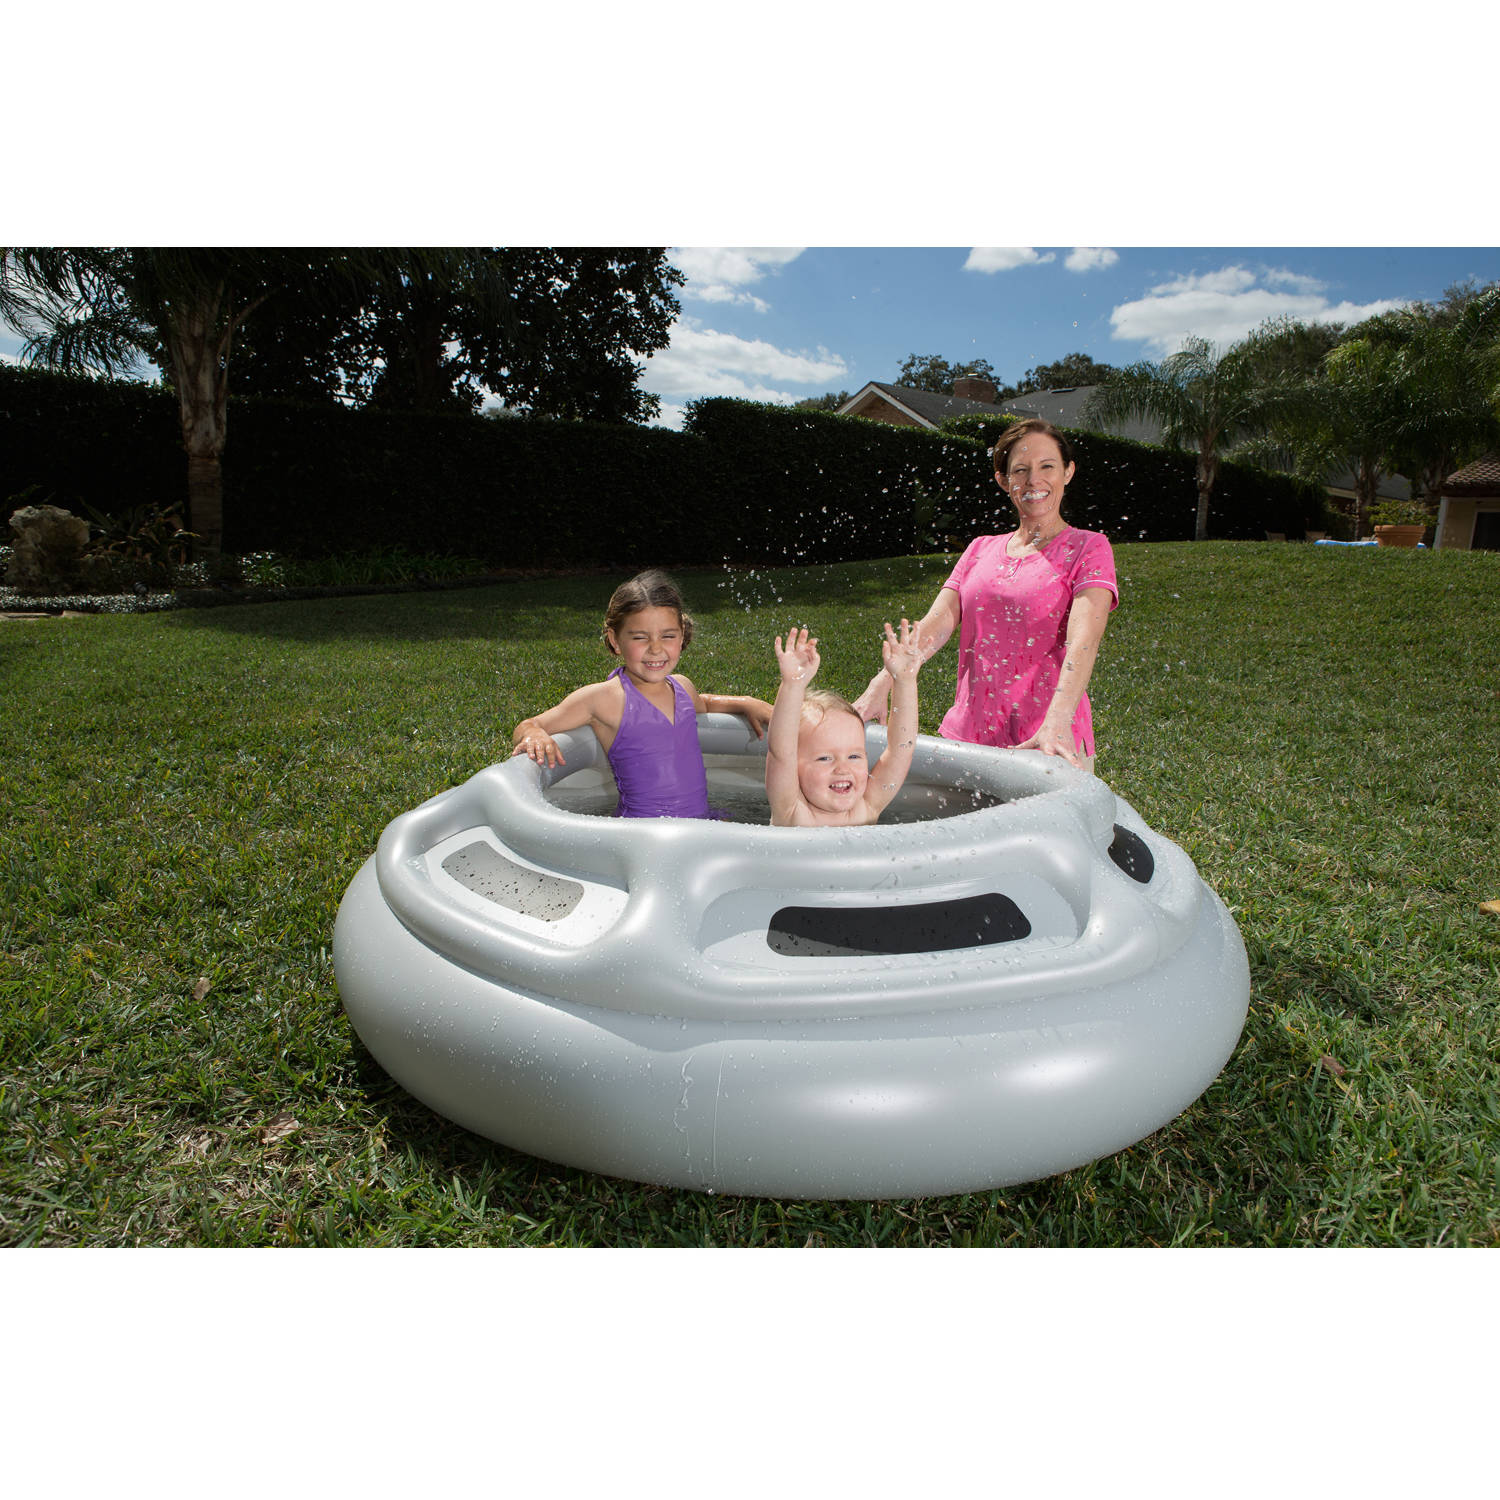 H2OGO! Outer Space Inflatable Pool - image 5 of 7